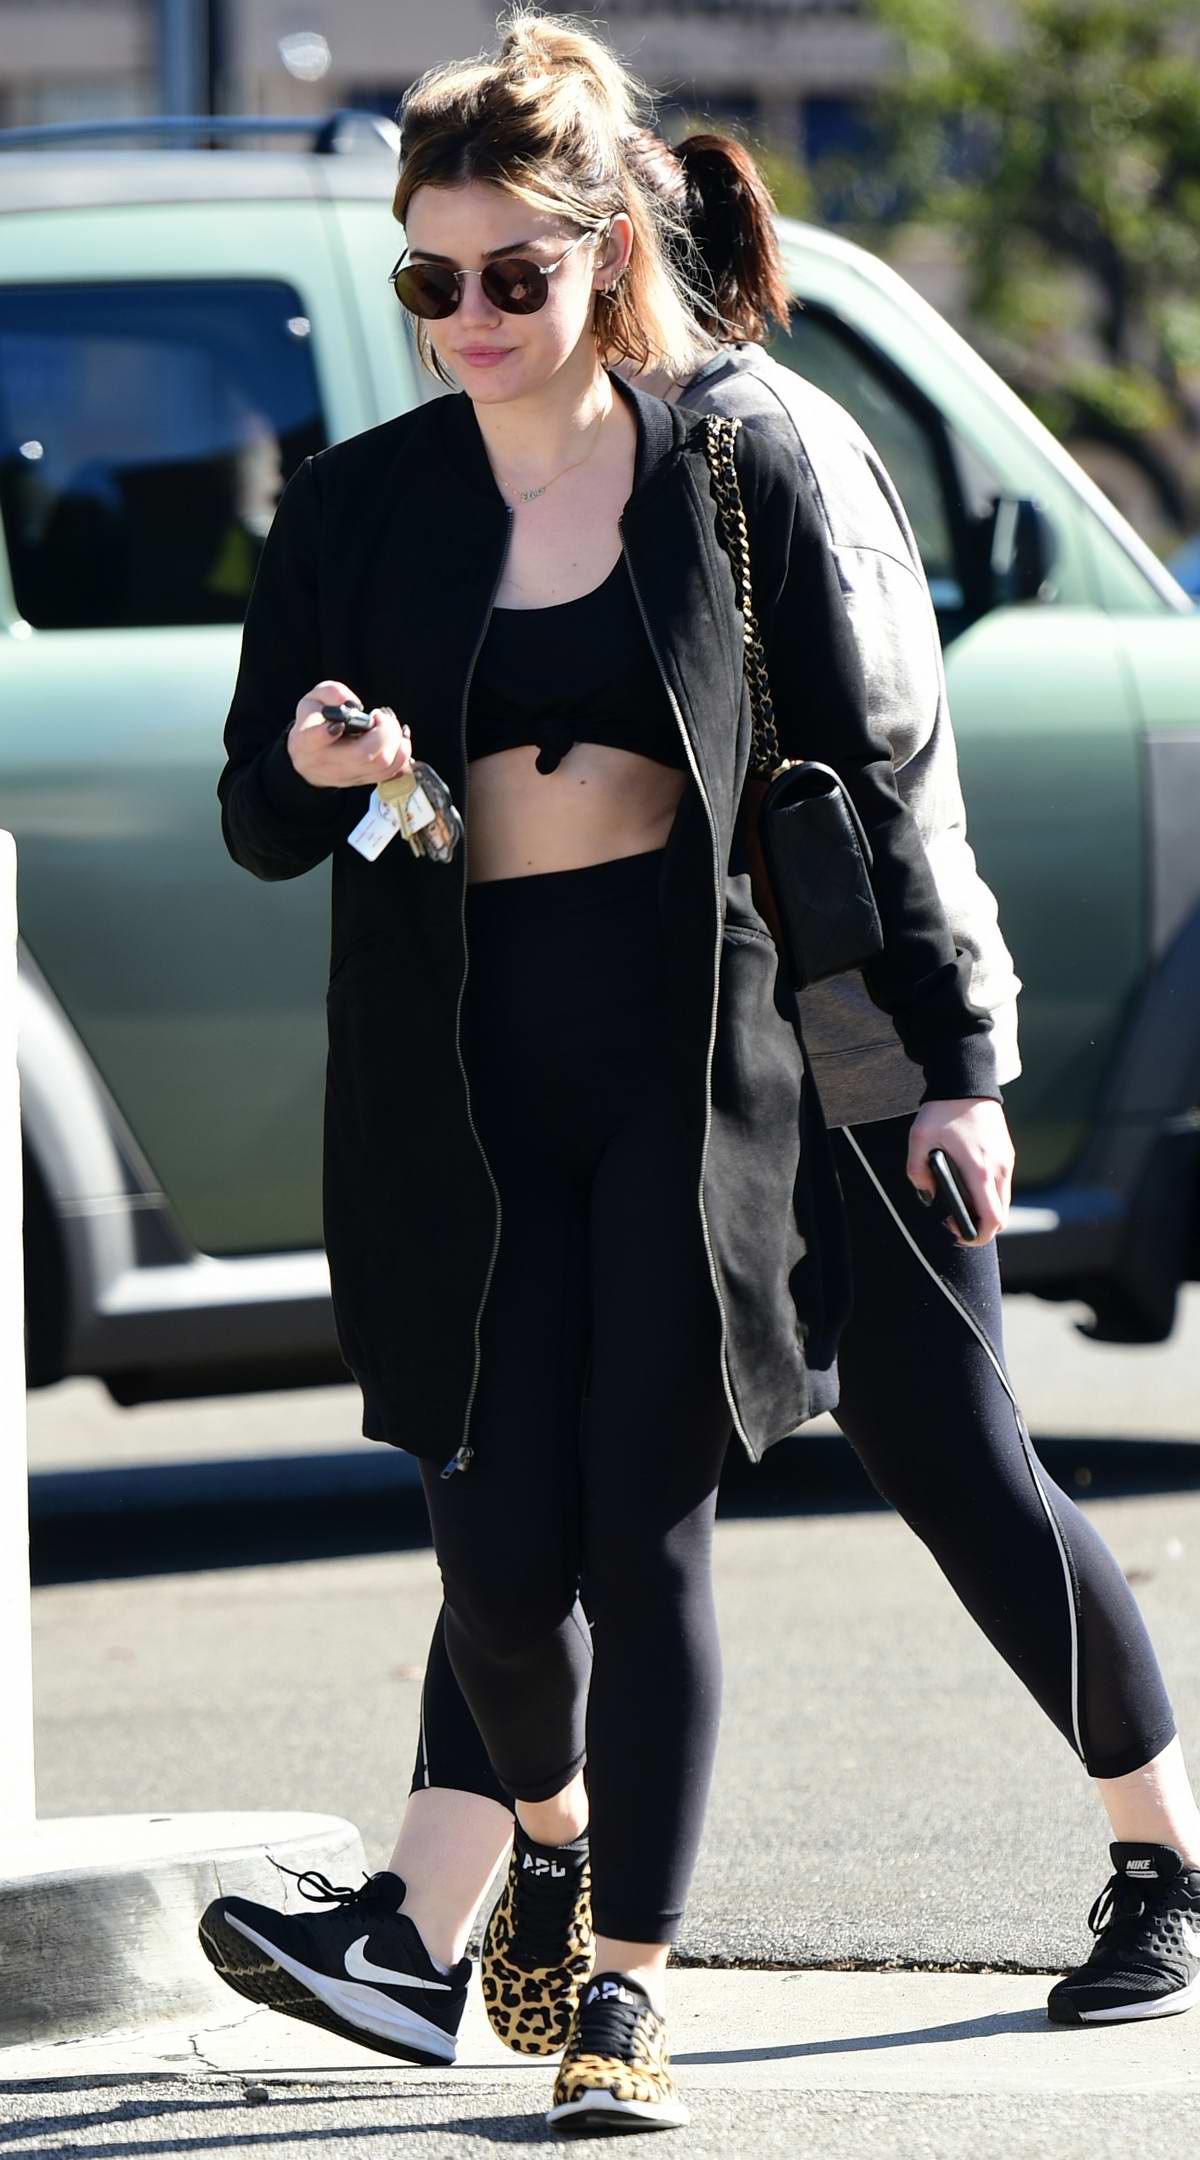 kendall jenner sports a sweatshirt and leggings while heading for